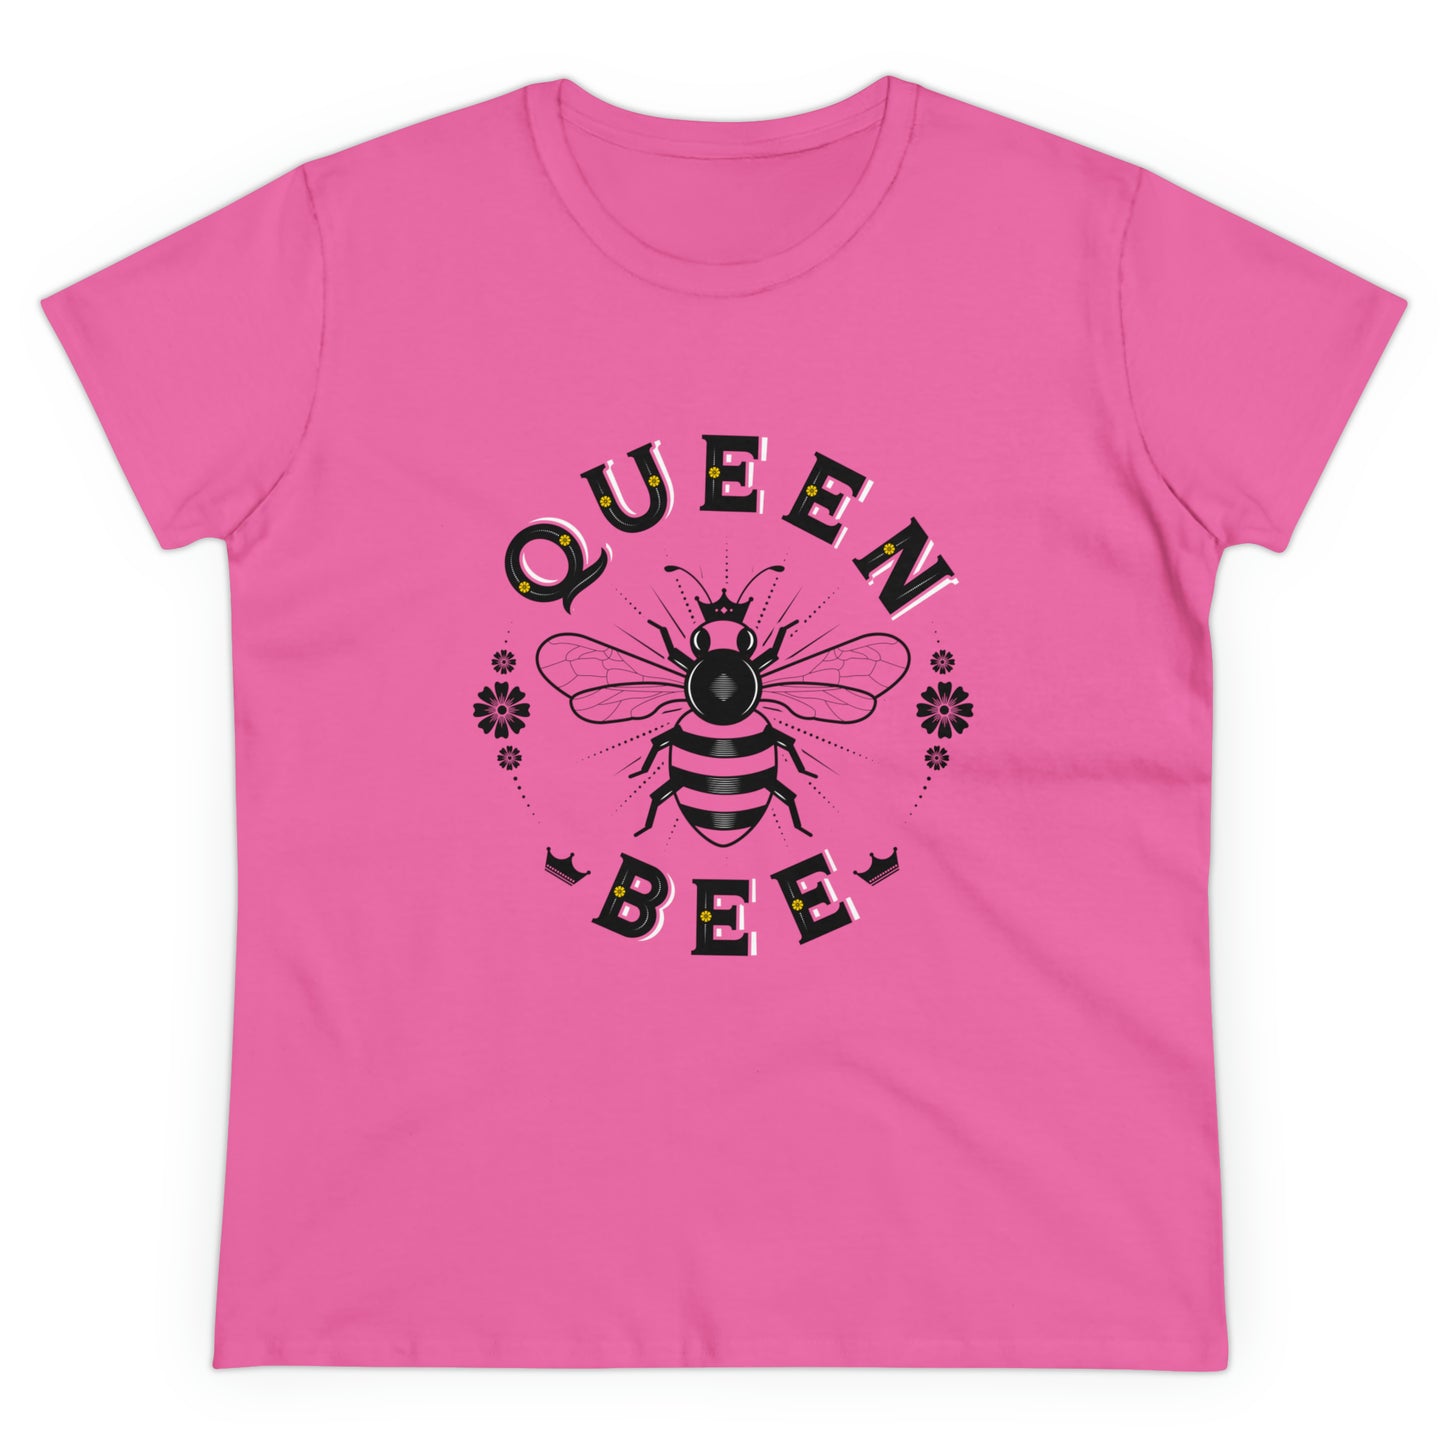 Queen Bee T-shirt with Botanical Flowers